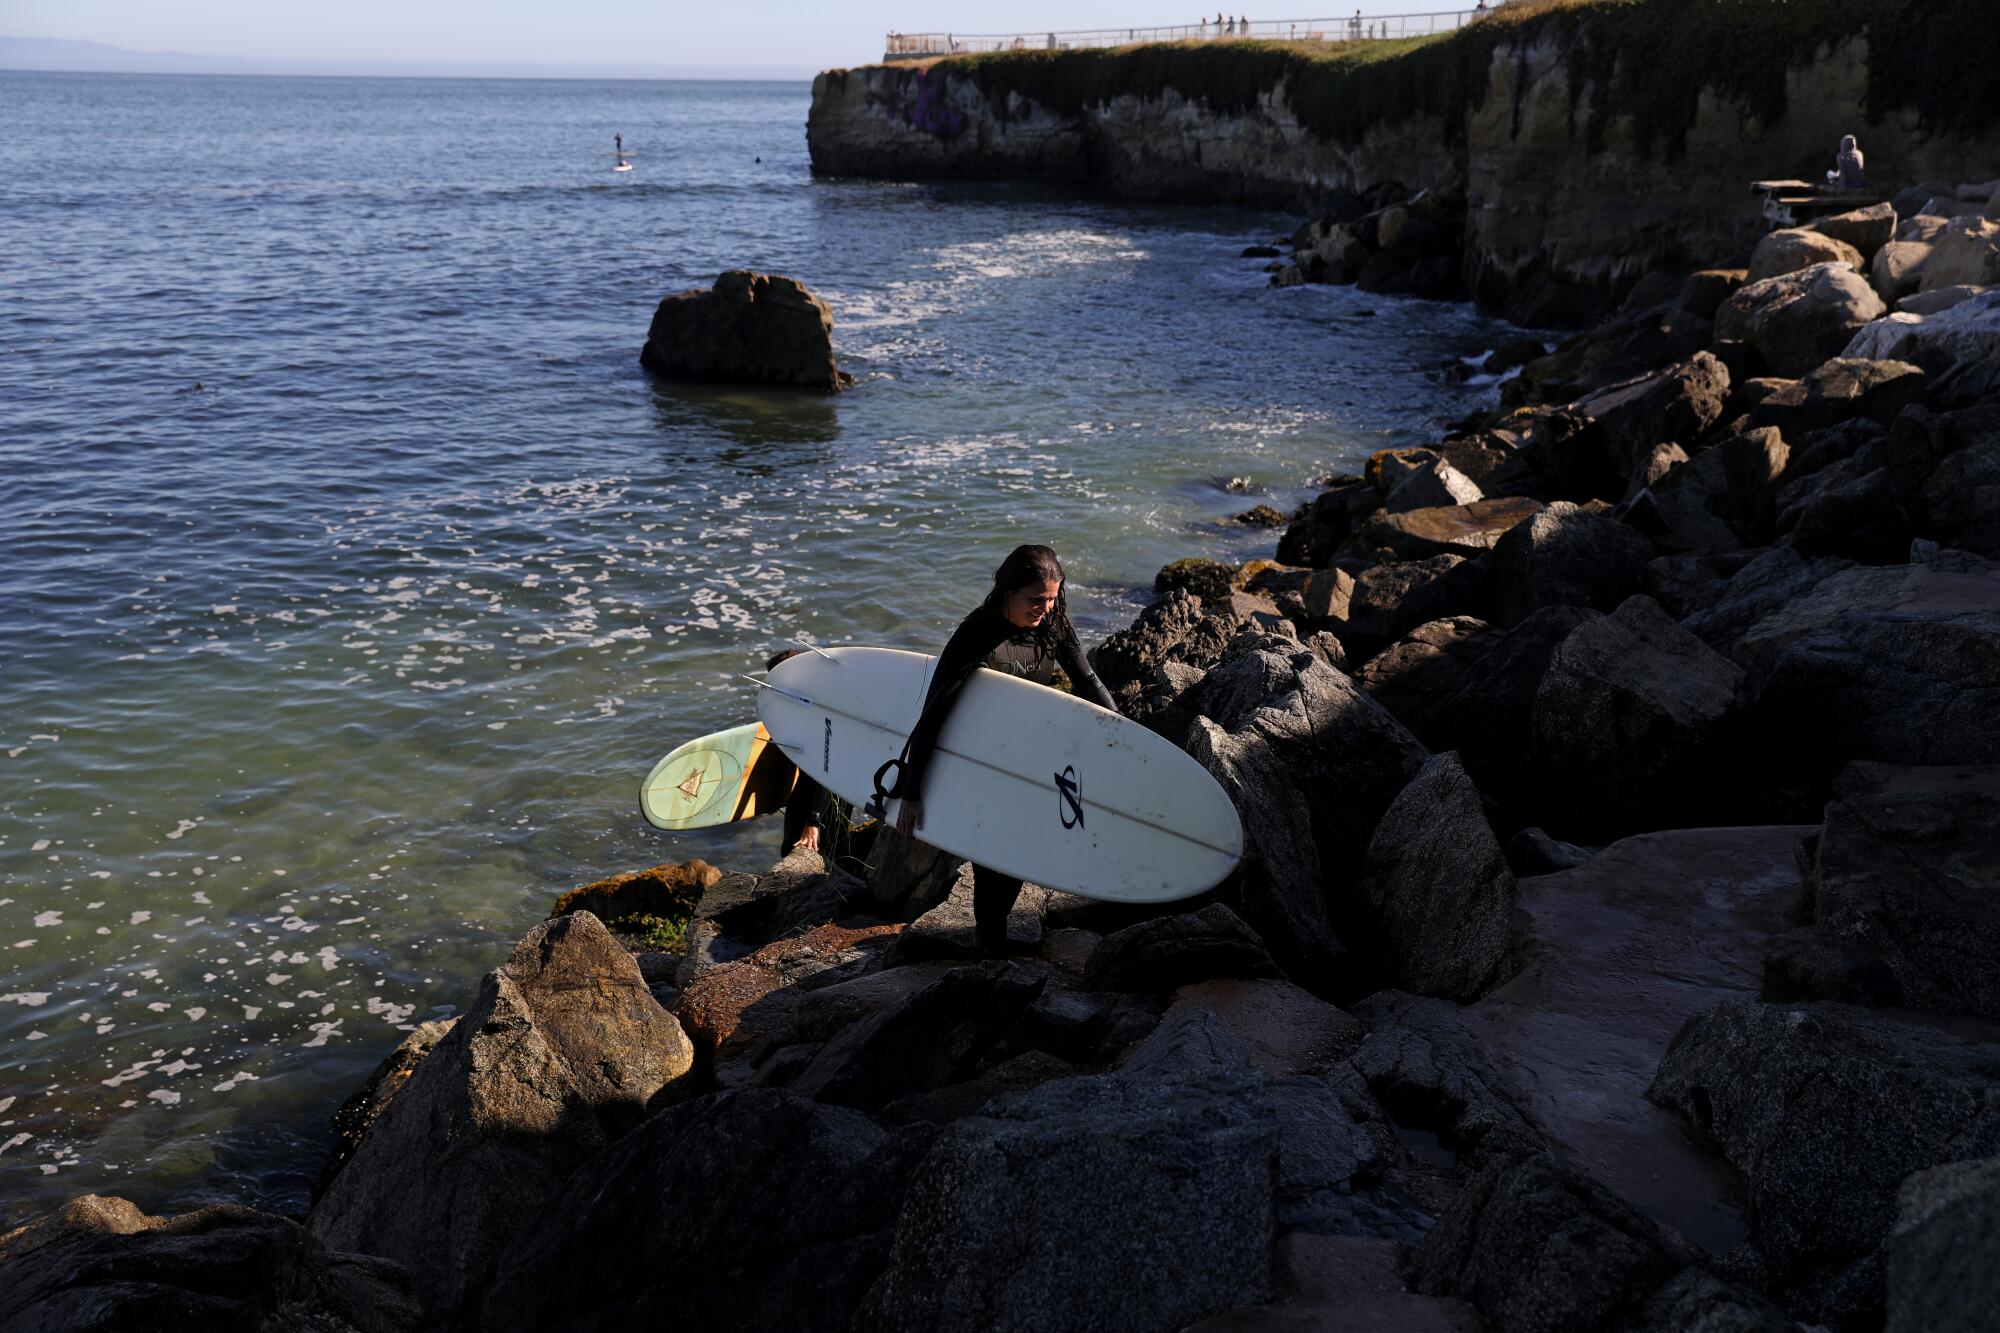 A surfer holding a white board walks up a rocky incline 